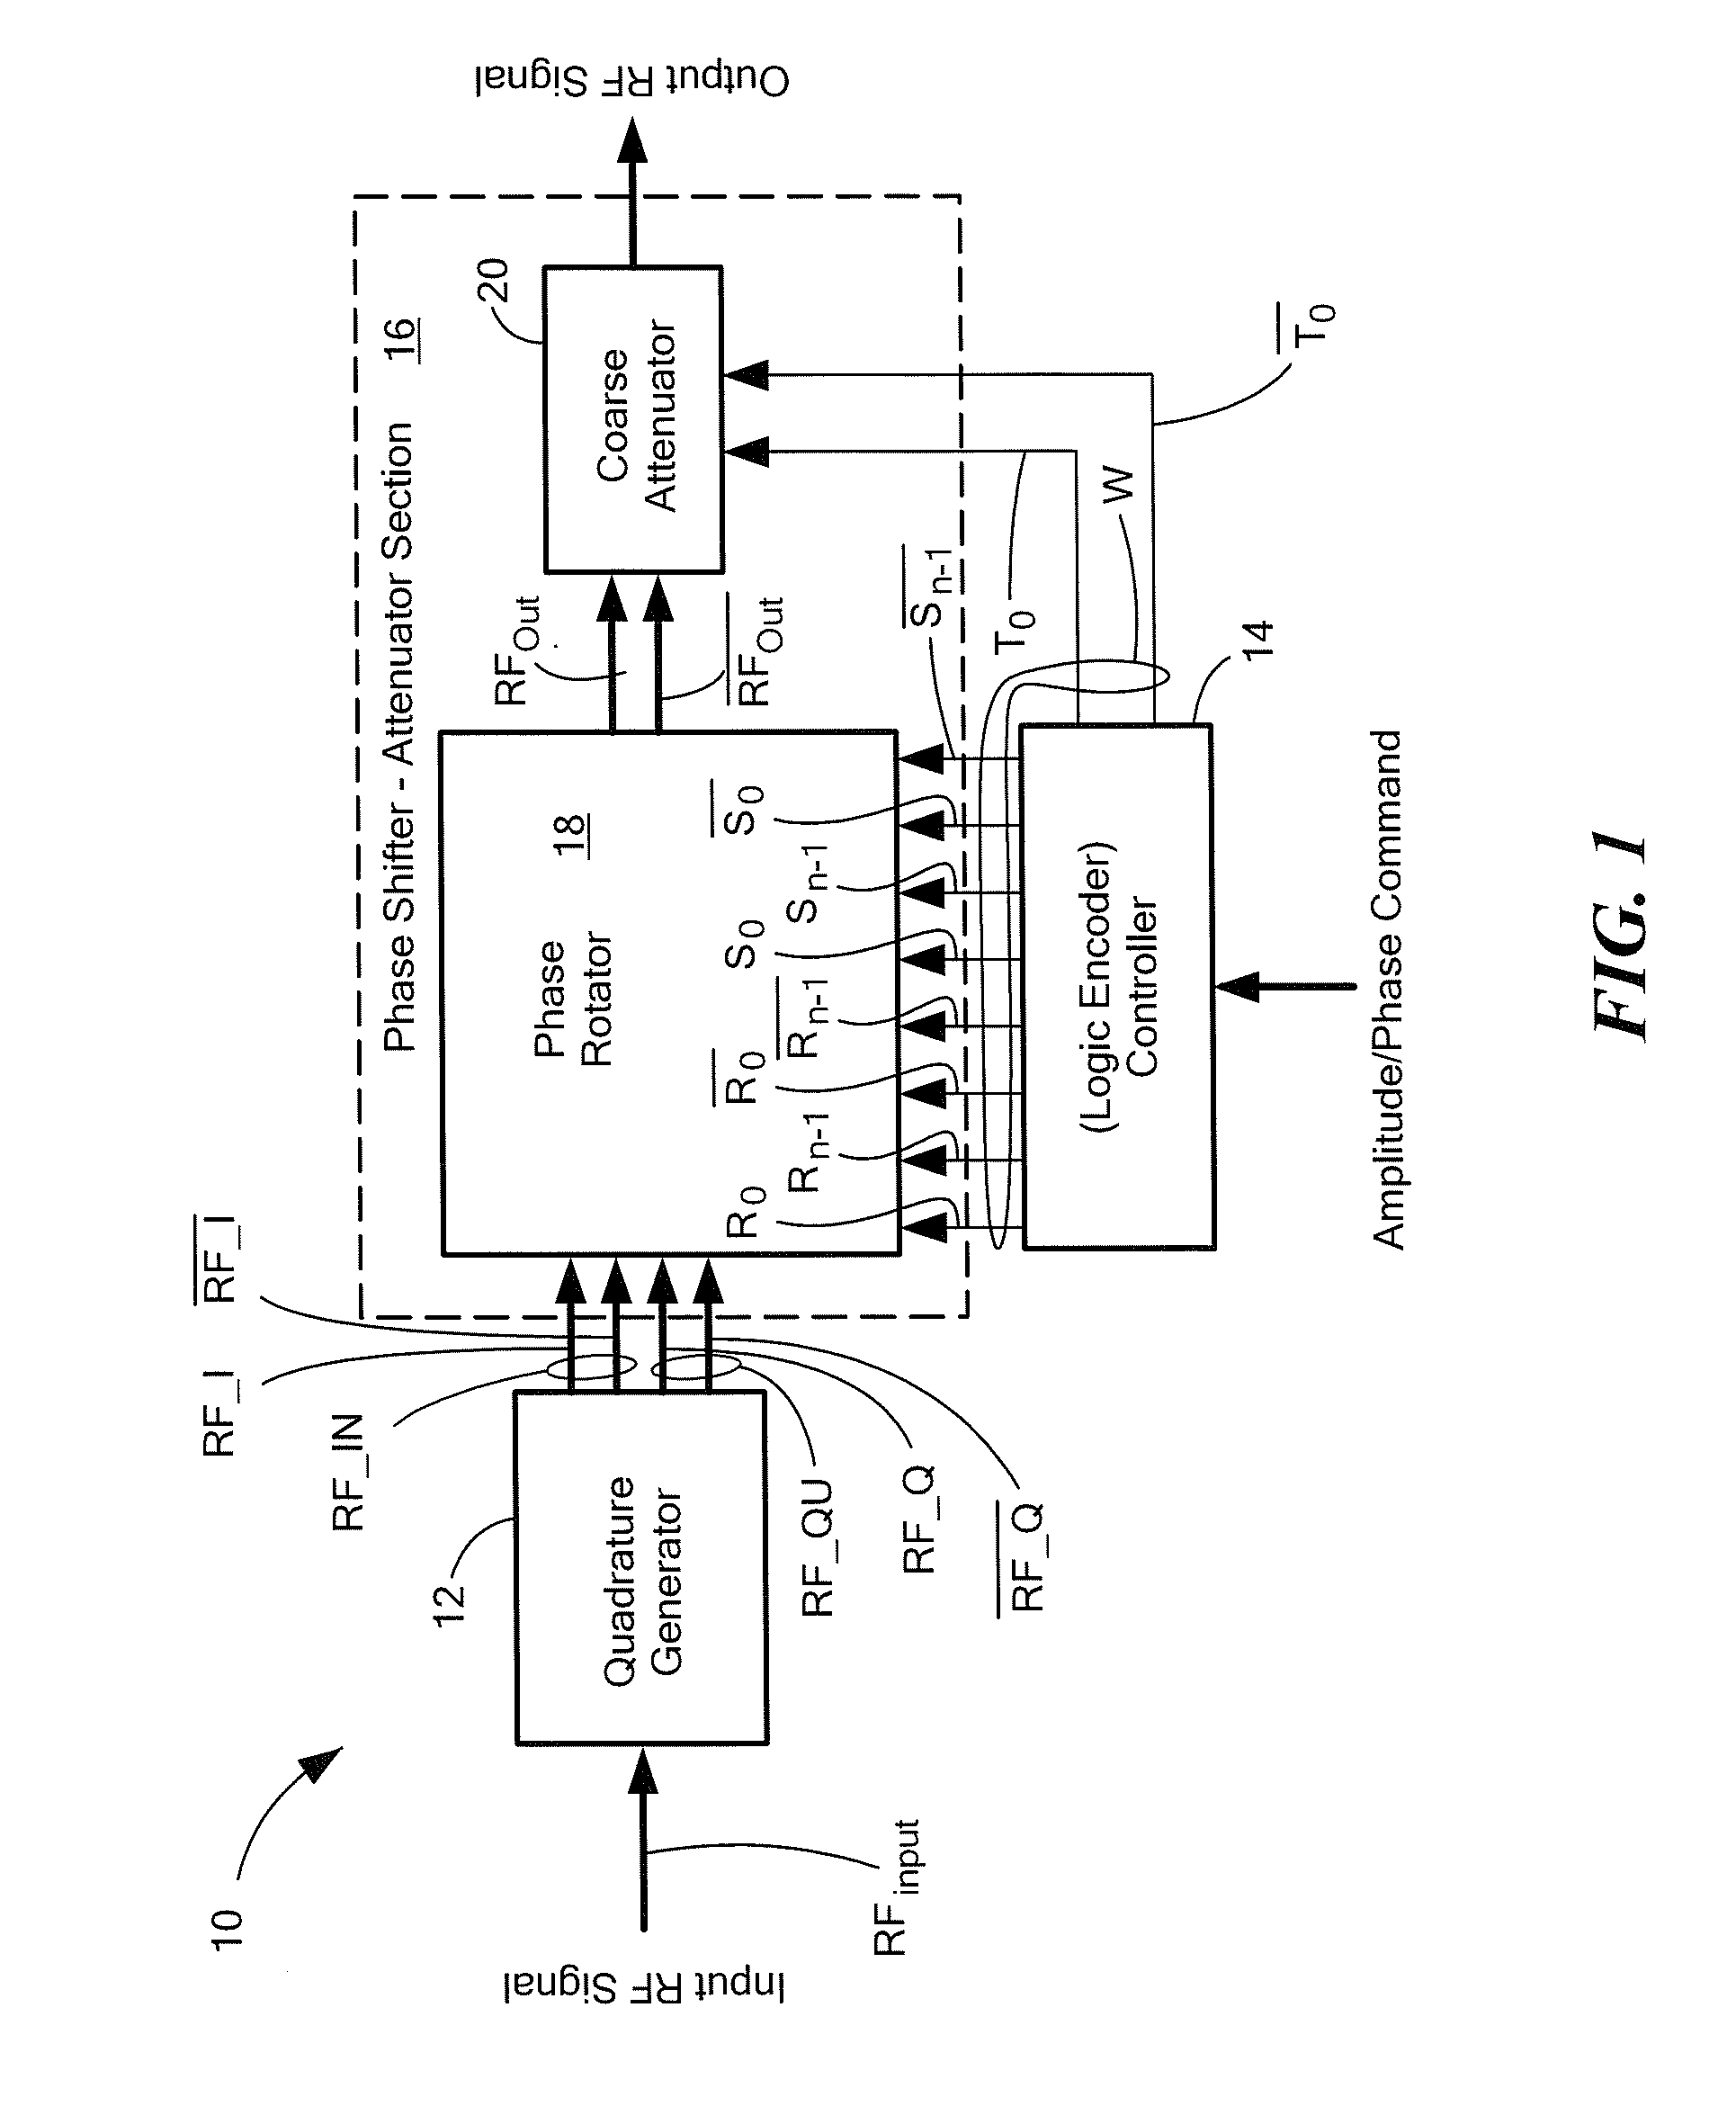 Variable phase shifter-attenuator